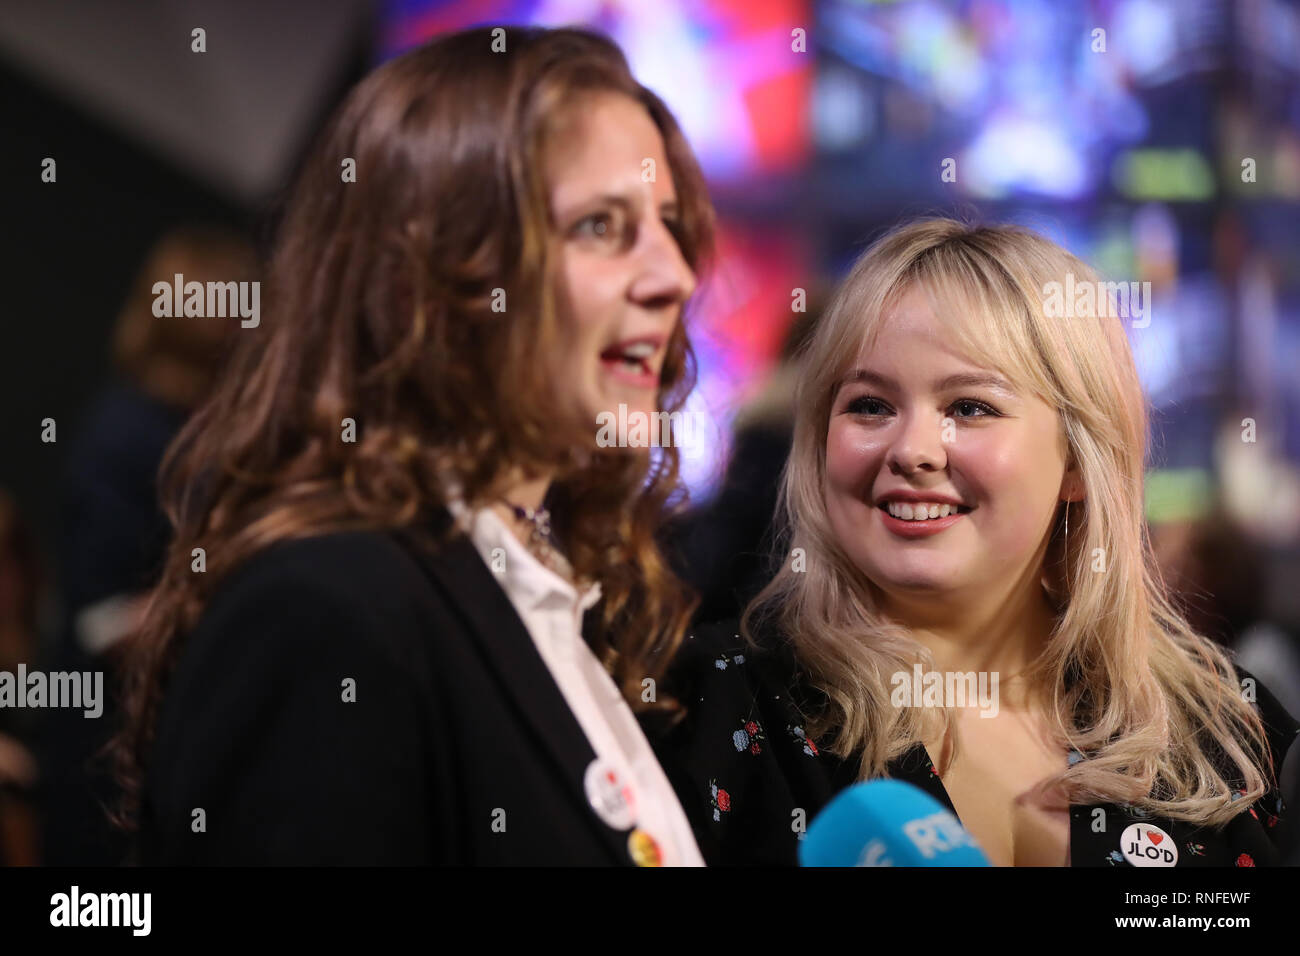 (left to right) Louisa Harland and Nicola Coughlan arrive at the Omniplex Cinema in Londonderry for the Derry Girls premiere ahead of the broadcast of the second series on Channel 4. Stock Photo